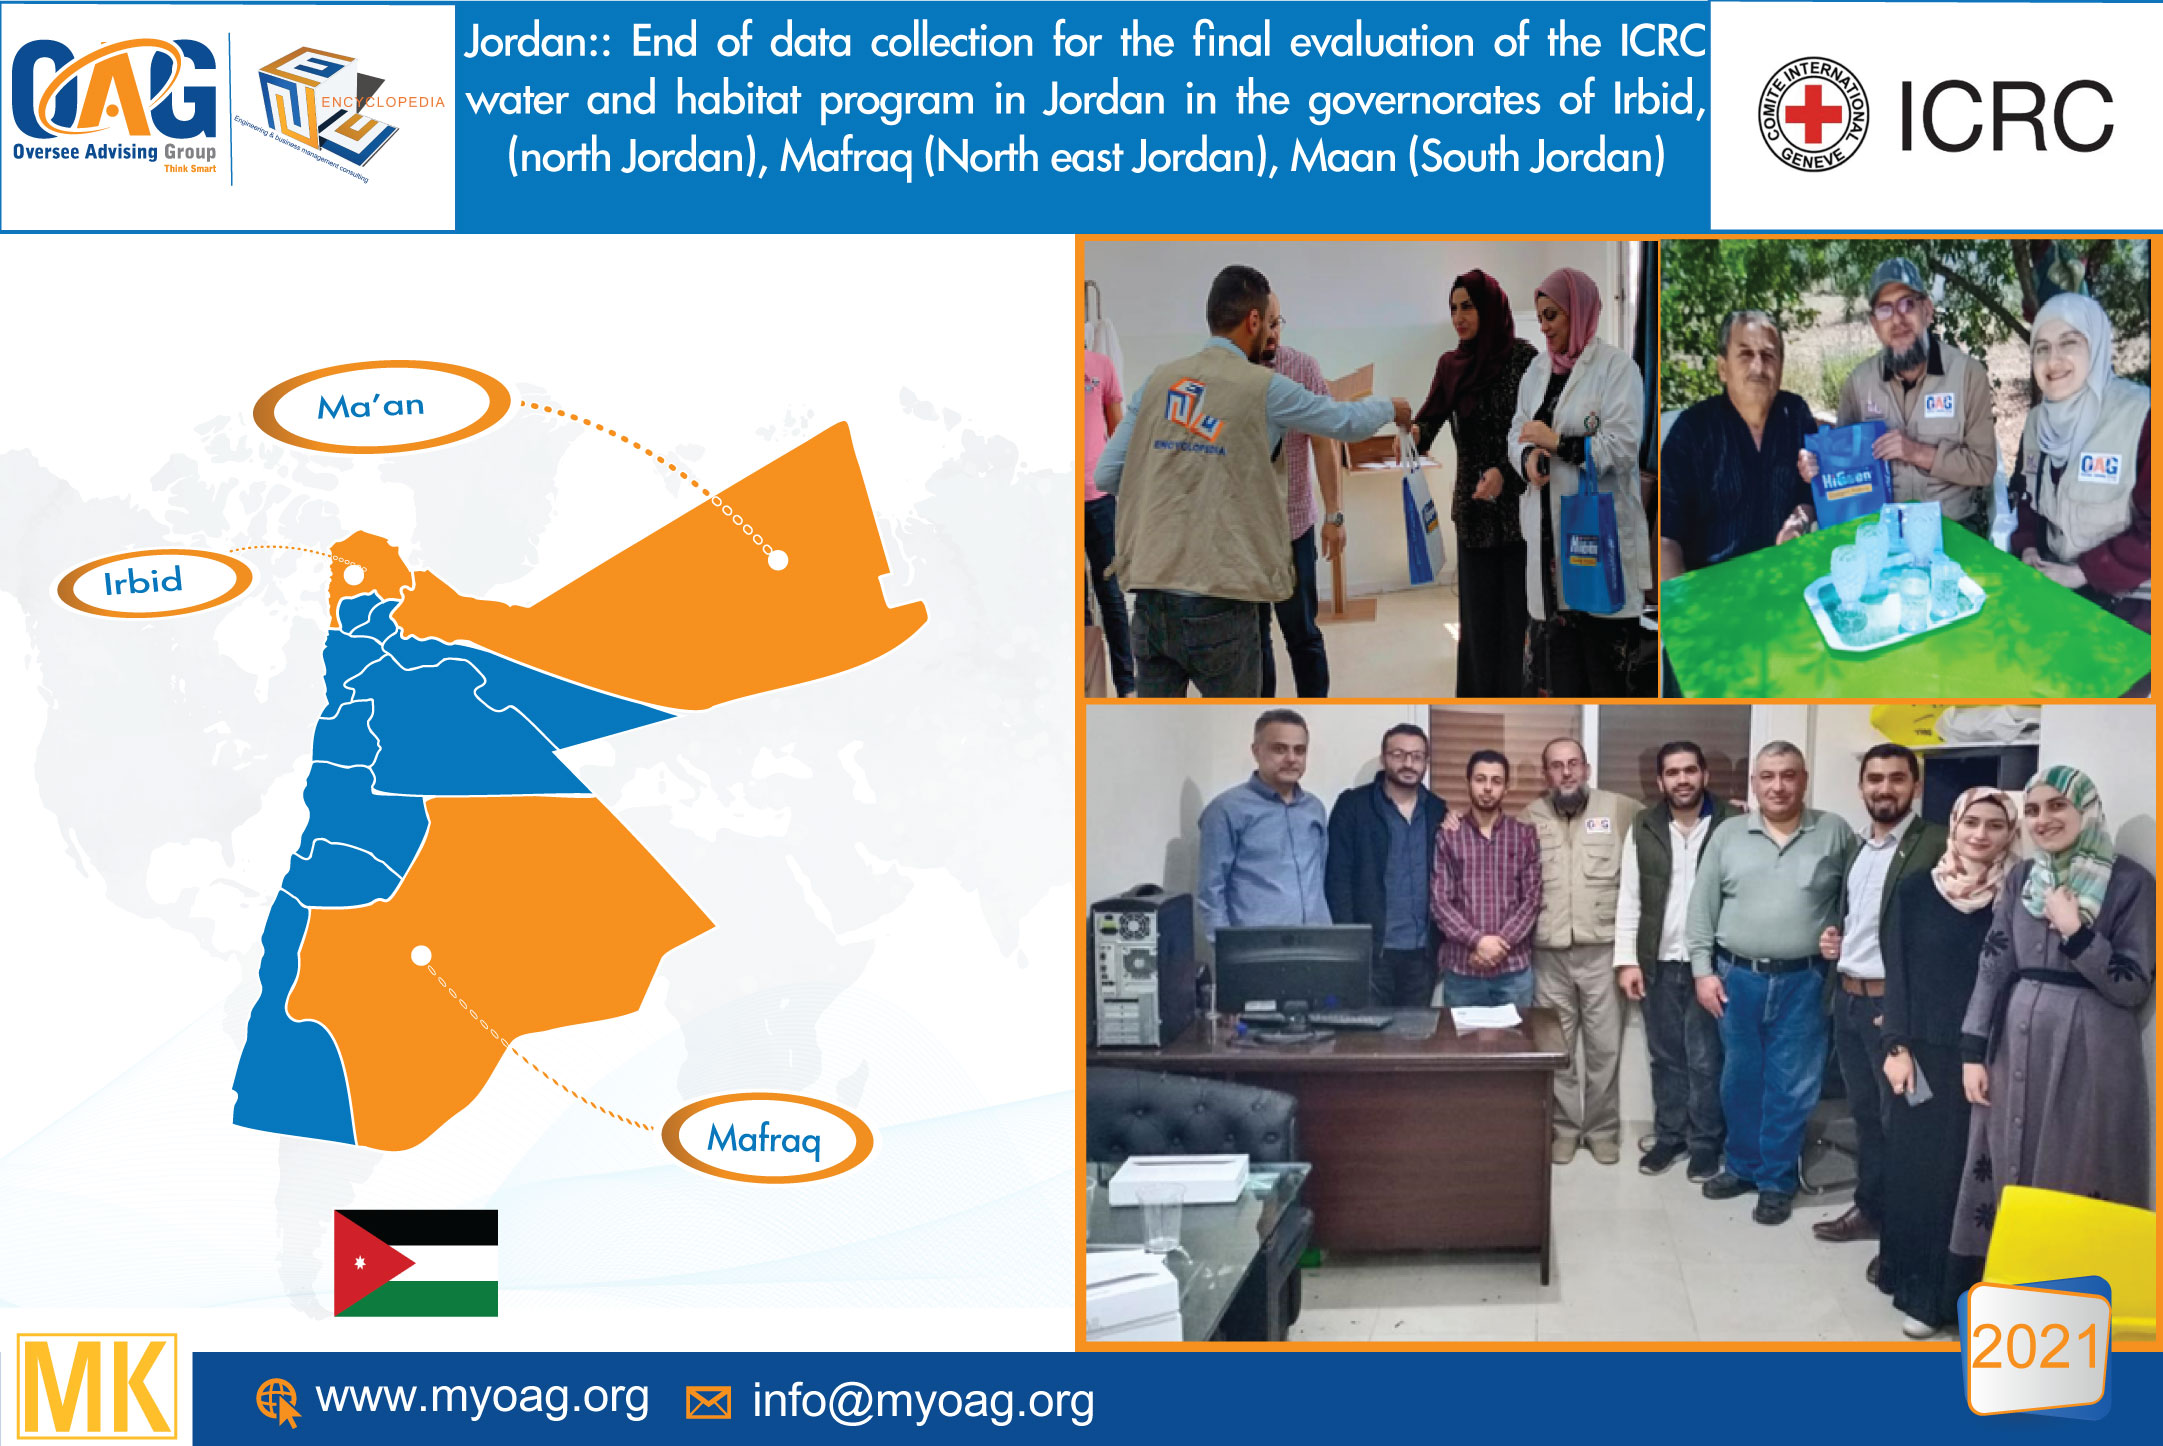 Jordan:: End of data collection for the final evaluation of the ICRC water and habitat program in Jordan in the governorates of Irbid, (north Jordan), Mafraq (North east Jordan), Maan (South Jordan)